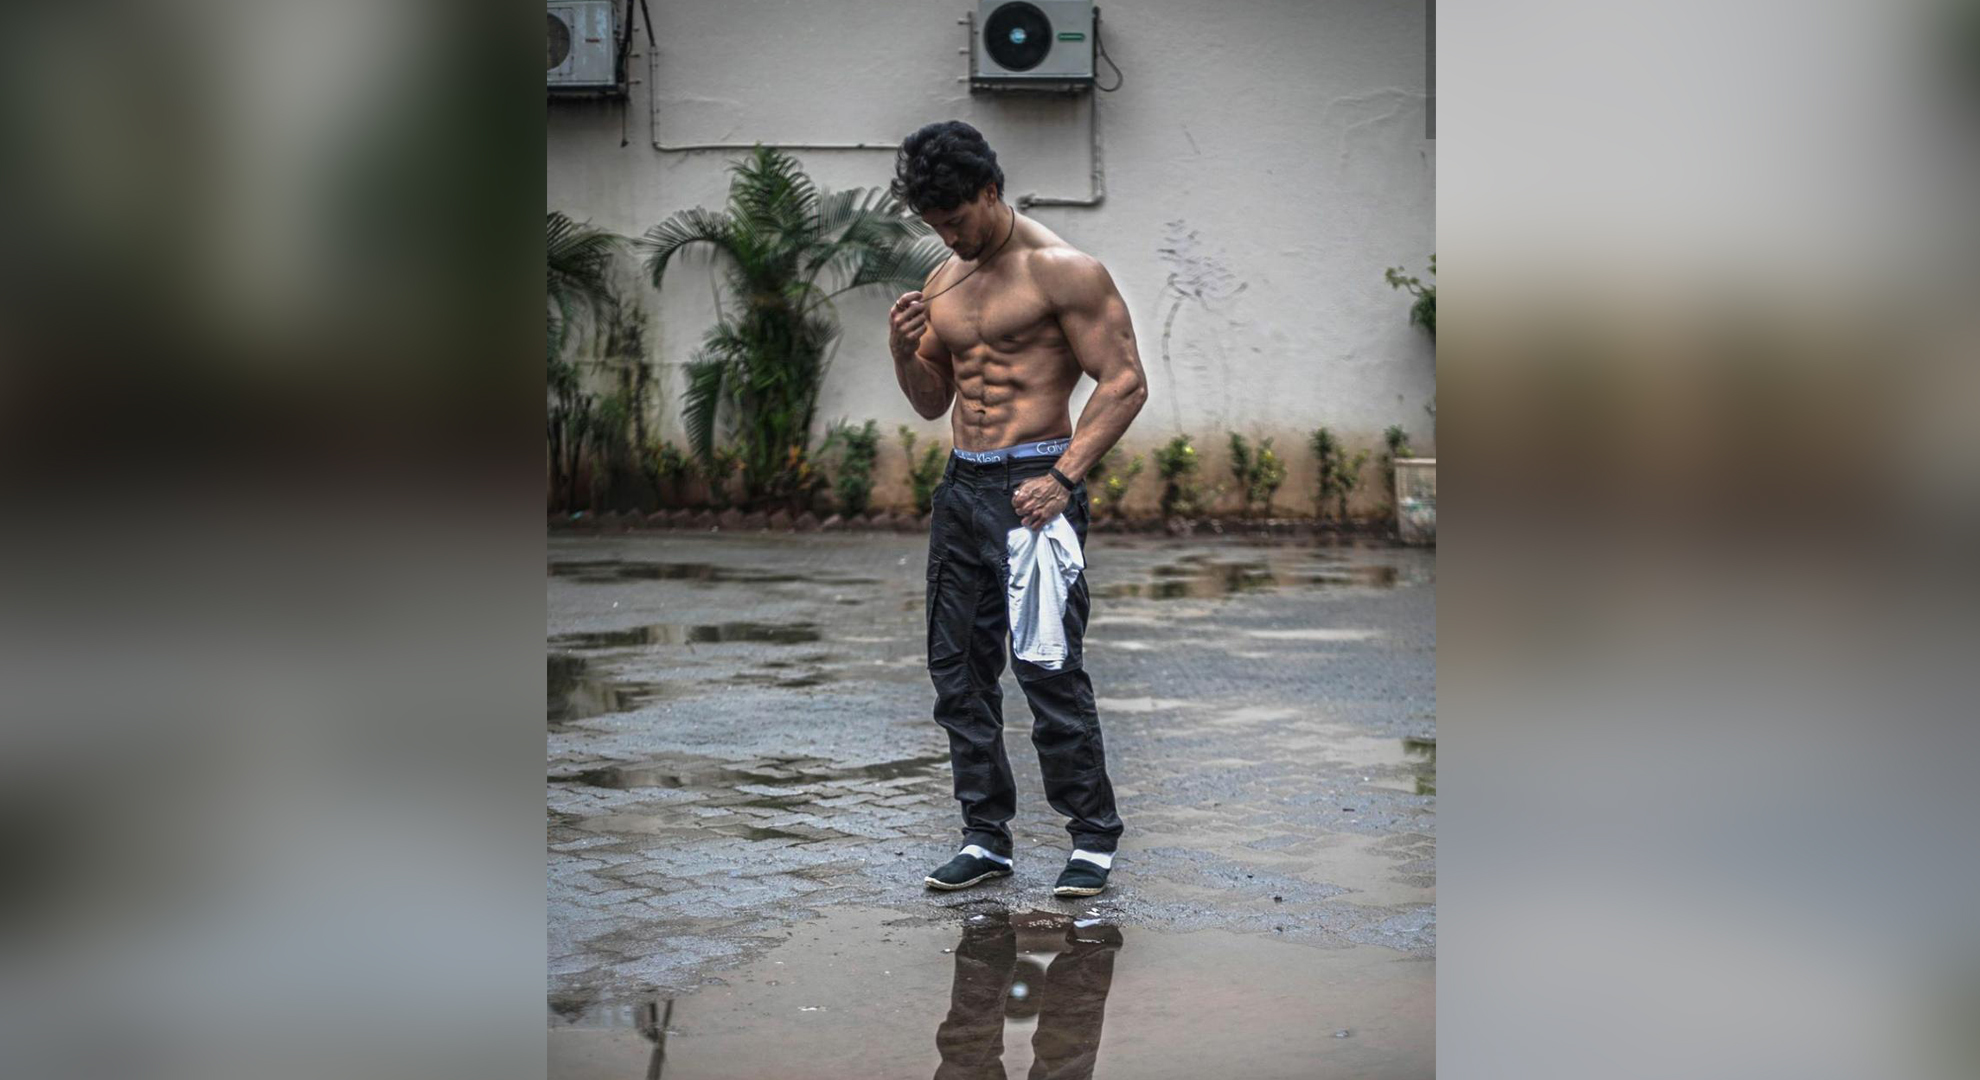 Tiger Shroff shares how the actor misses his workout routine and is trying to keep in shape, during the pandemic at home!